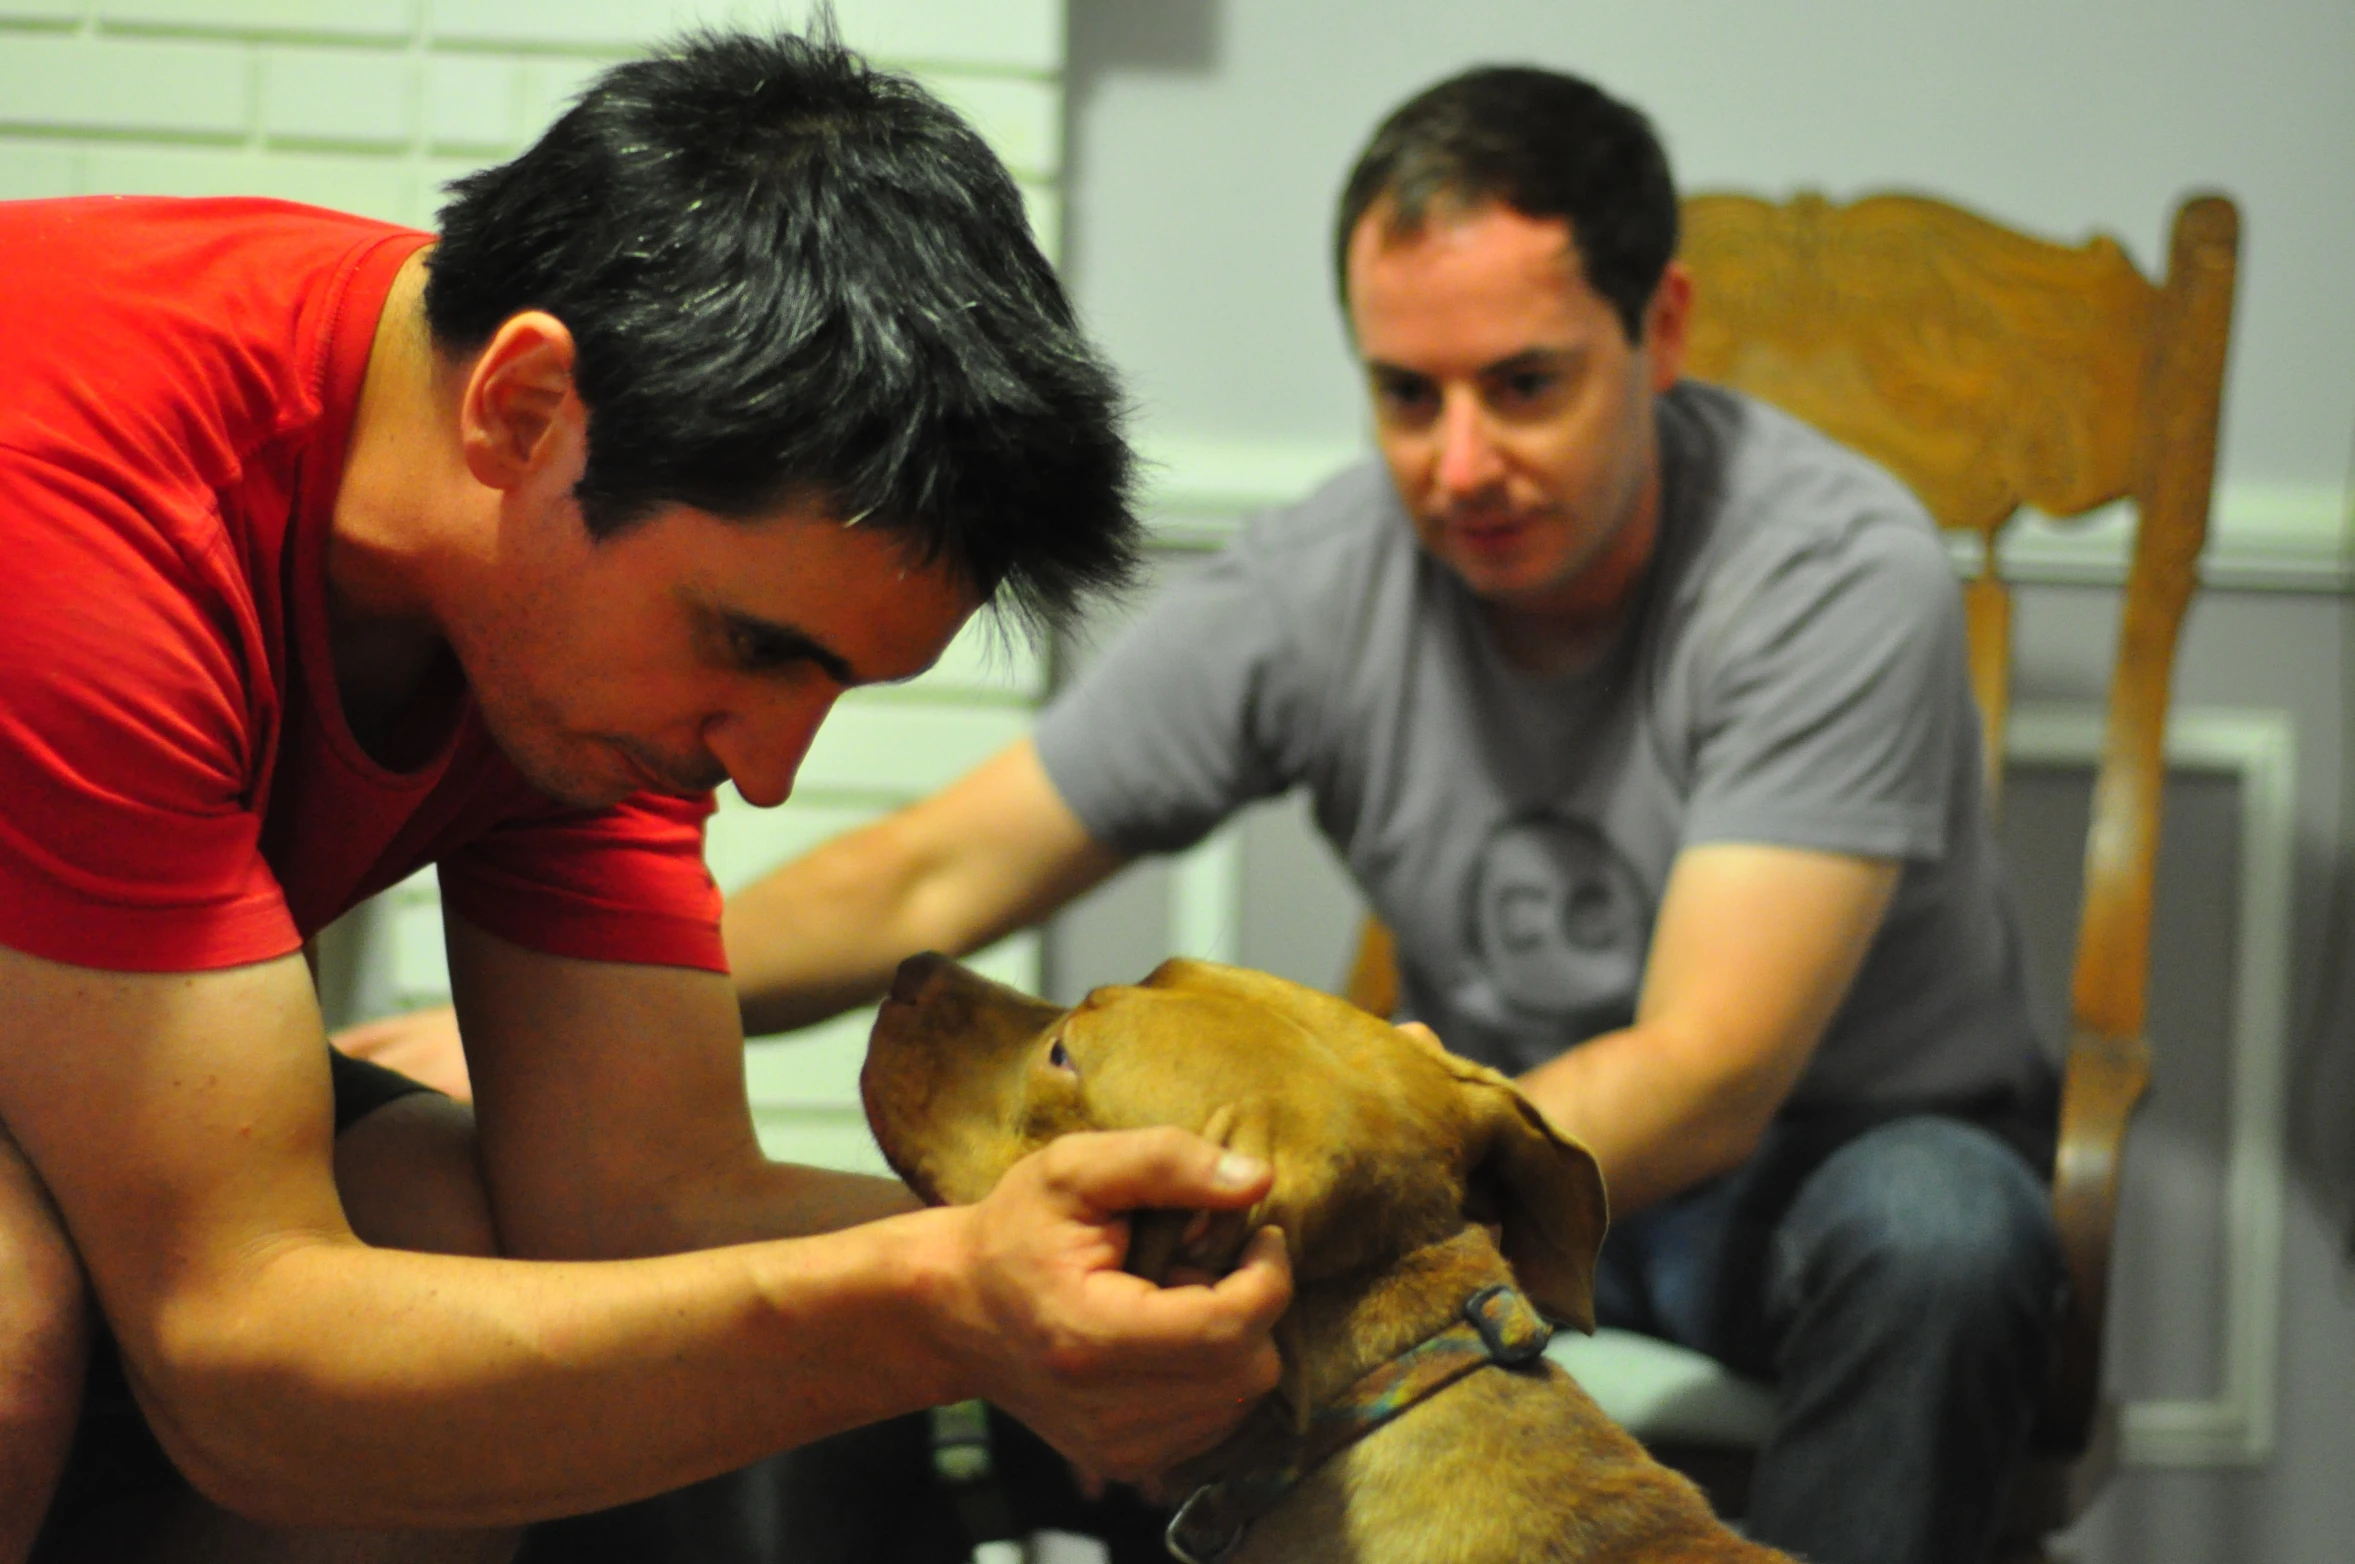 two men sitting in chairs petting a dog with one hand